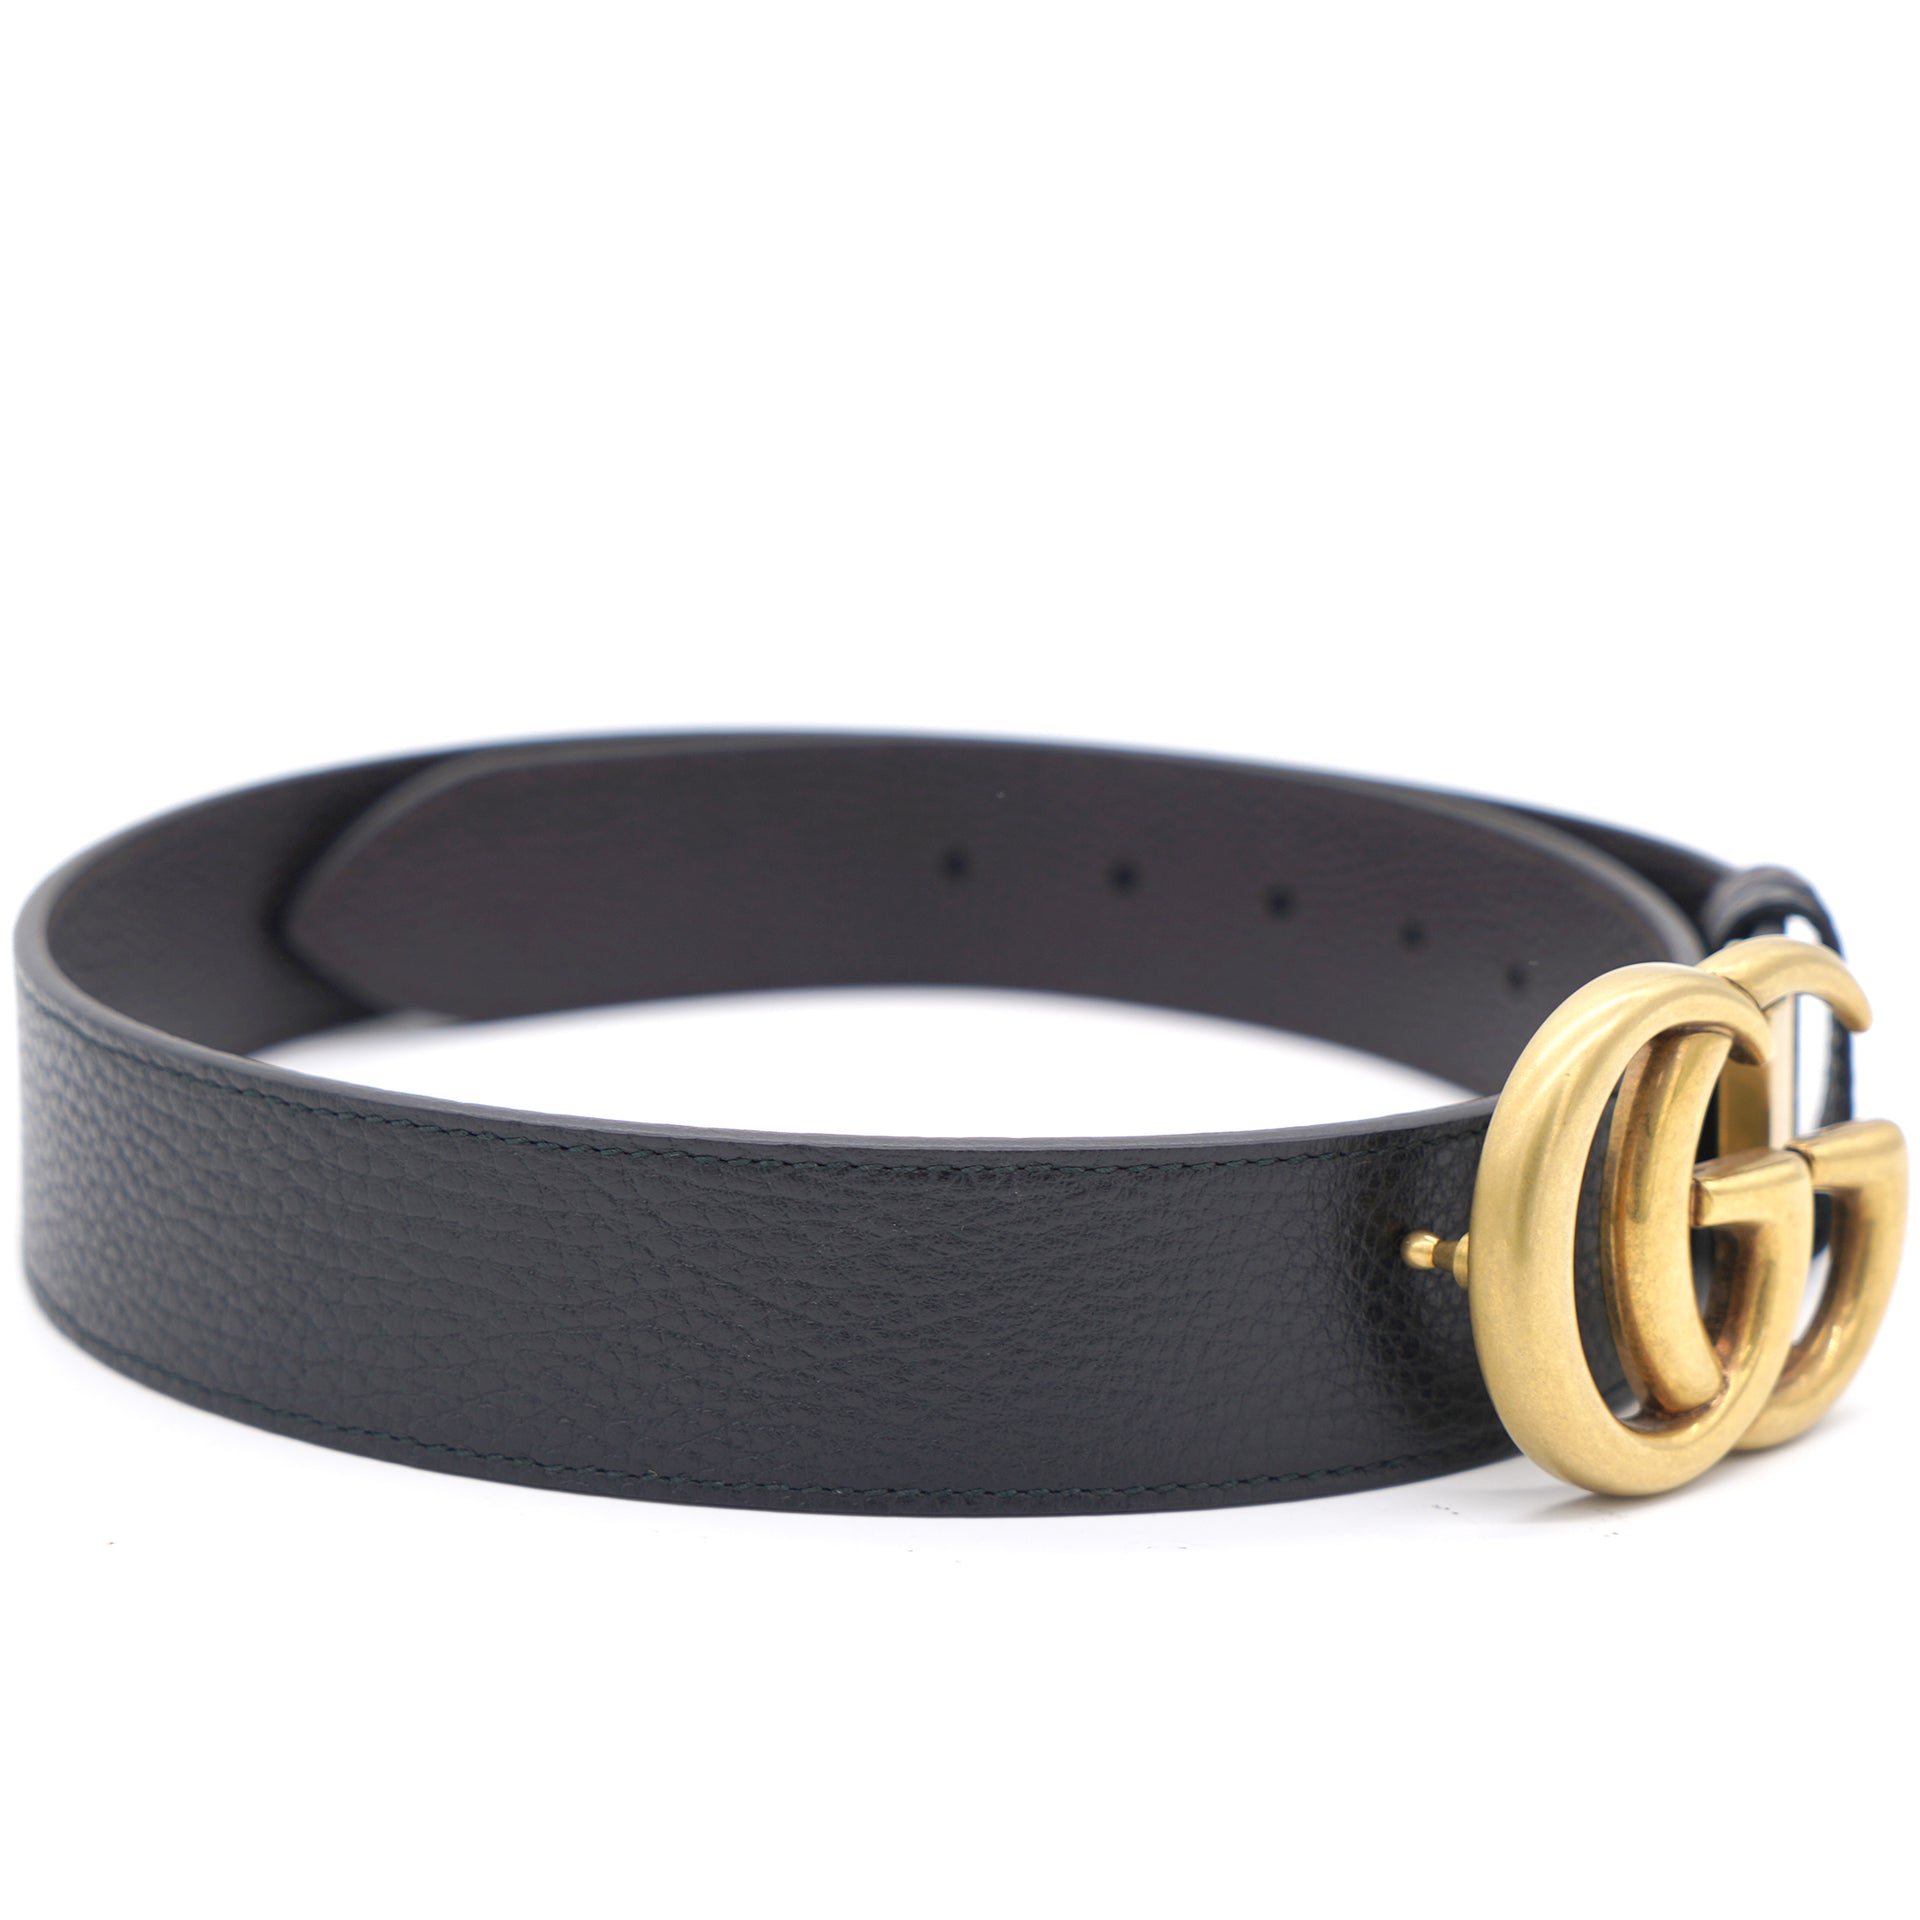 Reversible black/brown leather belt with Double G buckle